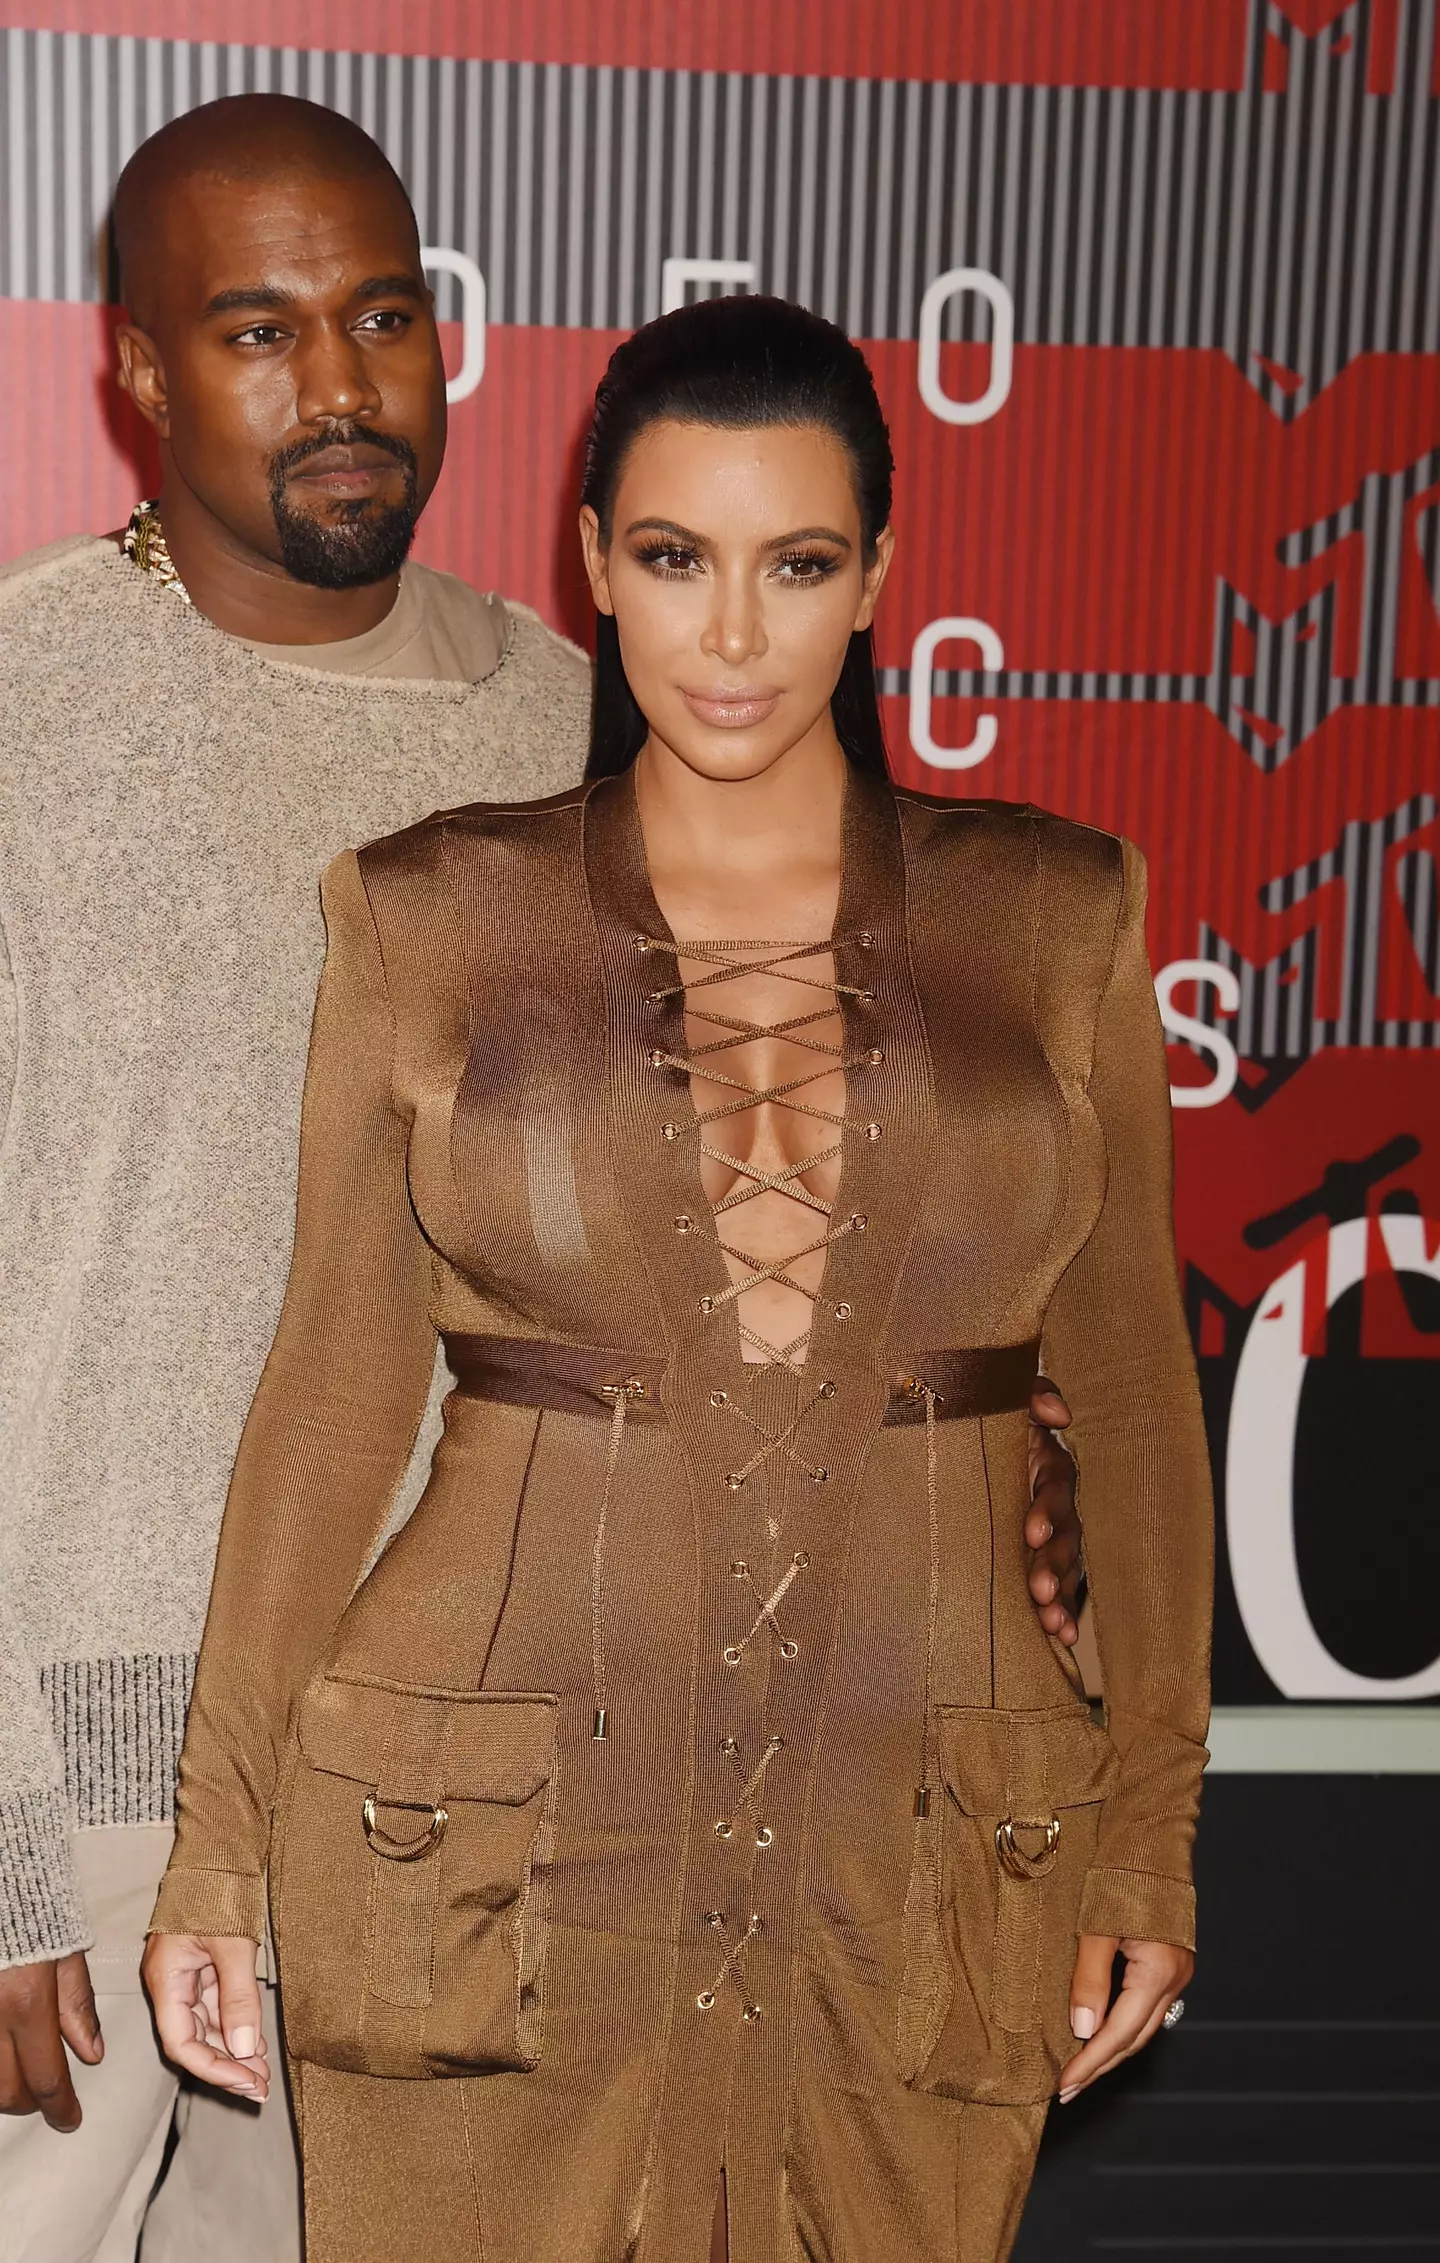 Kim and Kanye are going through a divorce (